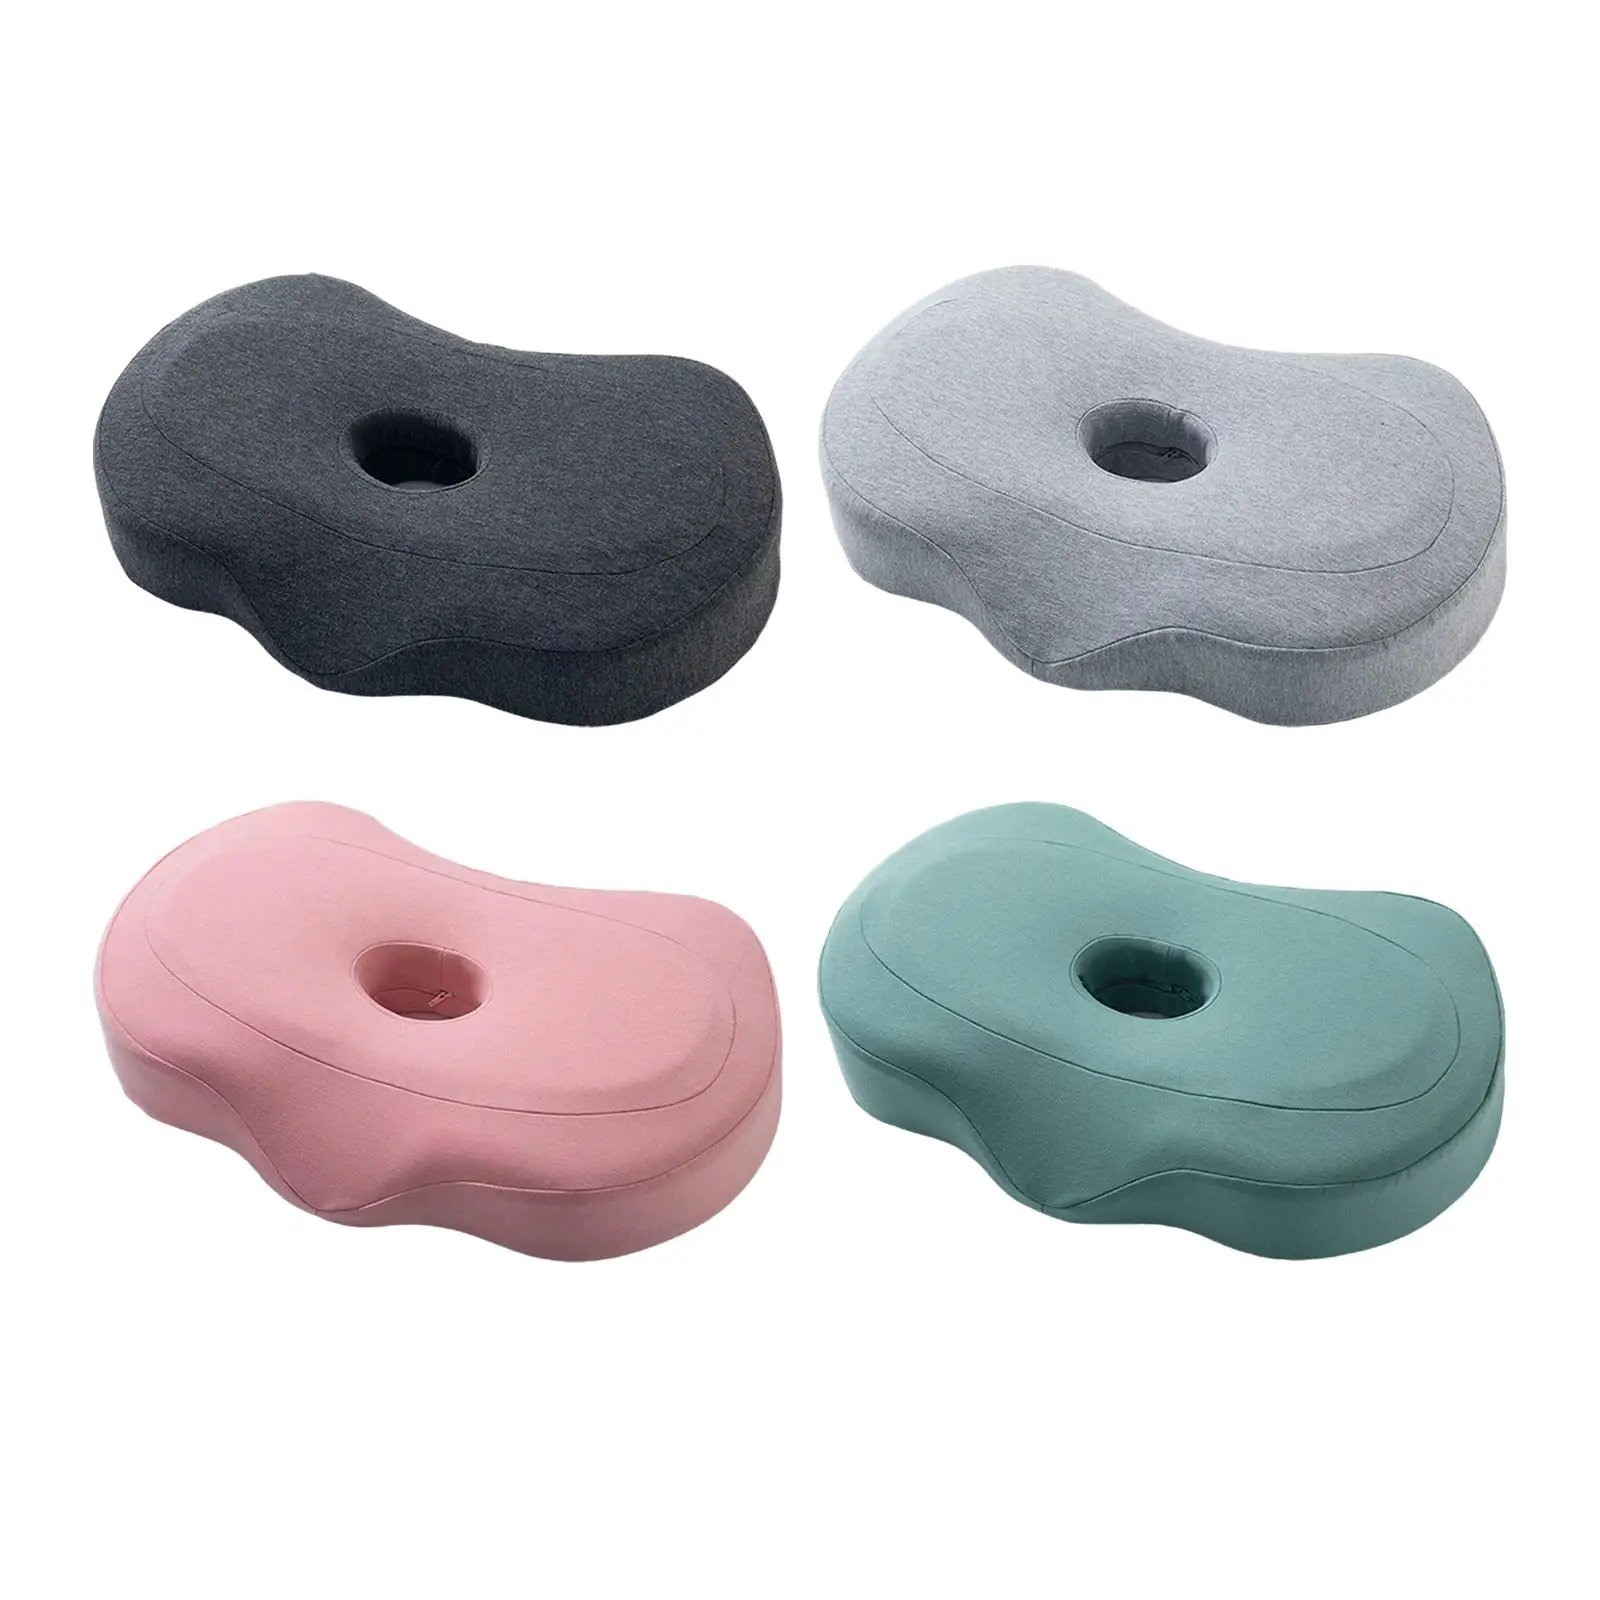 Ear Piercing Pillow Breathable Small Pillow with Ear Hole Pillow for Holiday Gifts